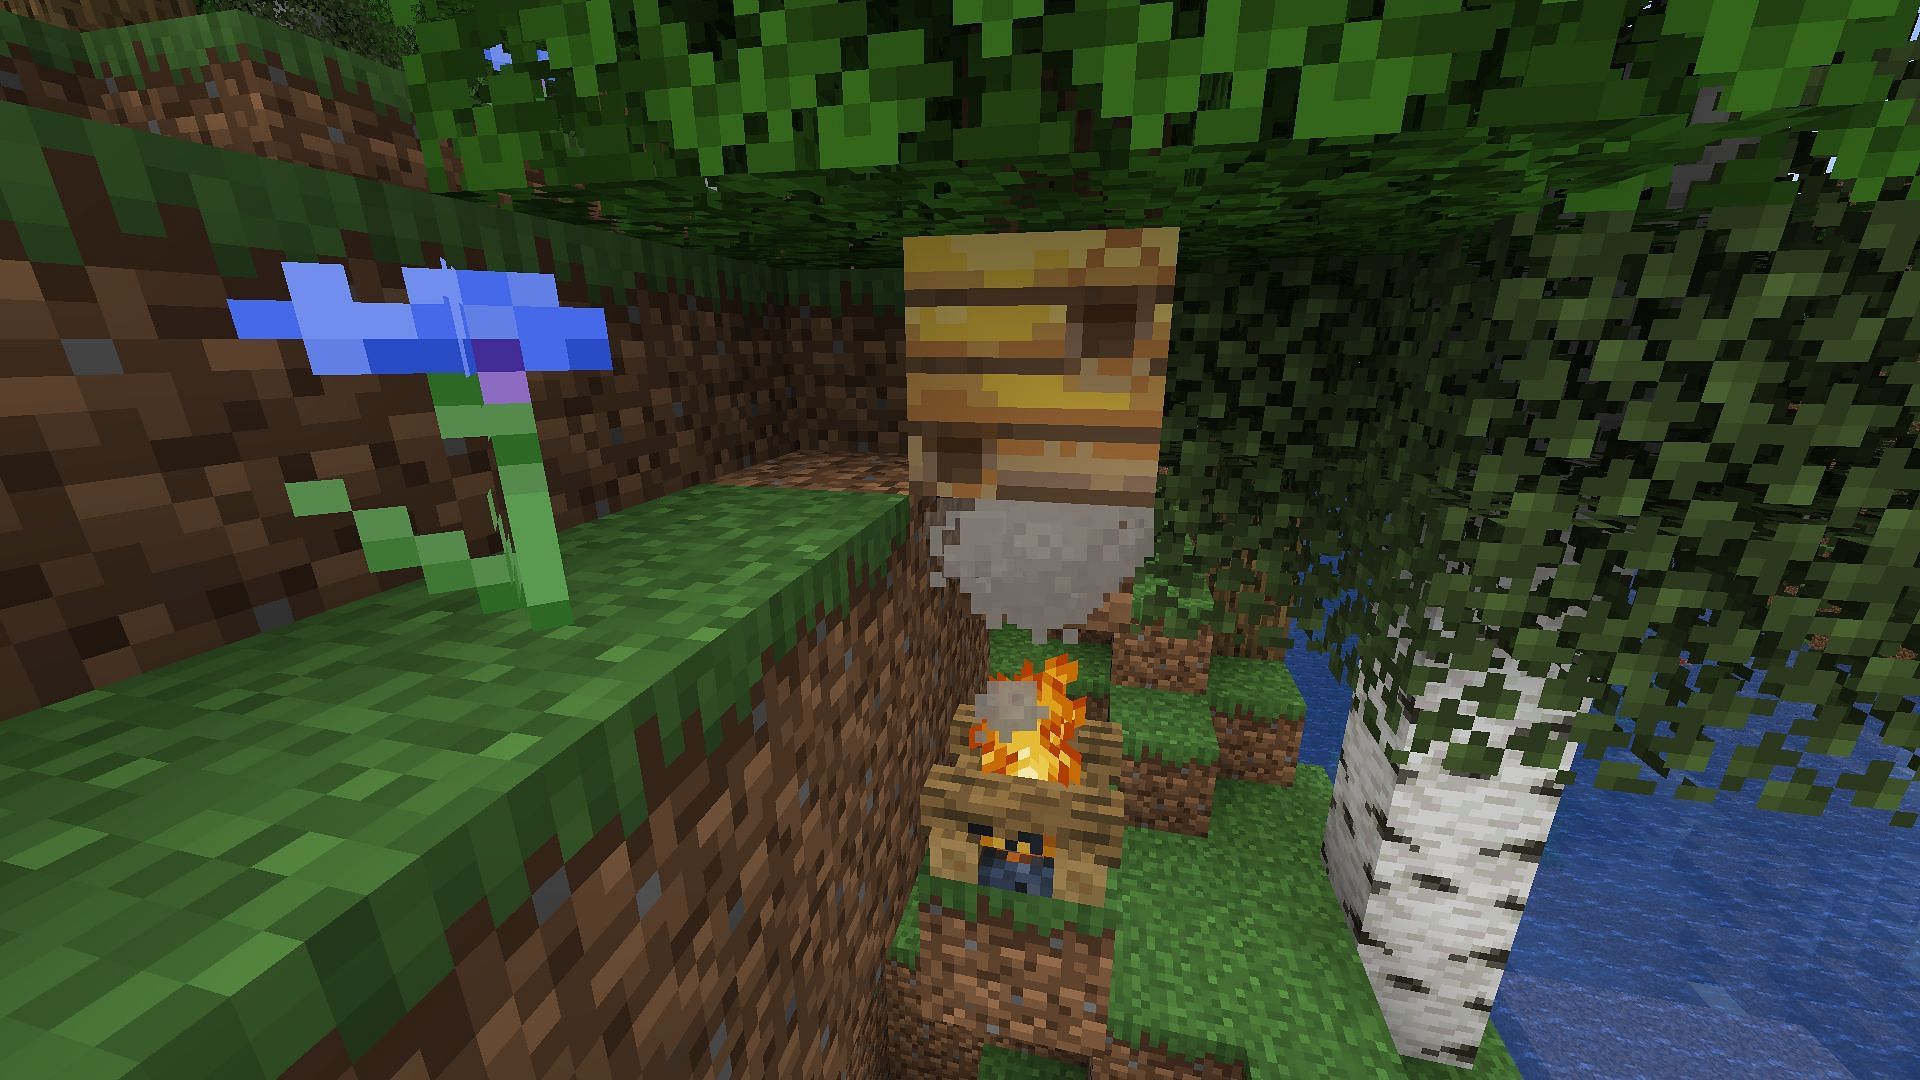 Place campfire underneath bee nest before extracting honey or honeycomb in Minecraft (Image via Mojang)